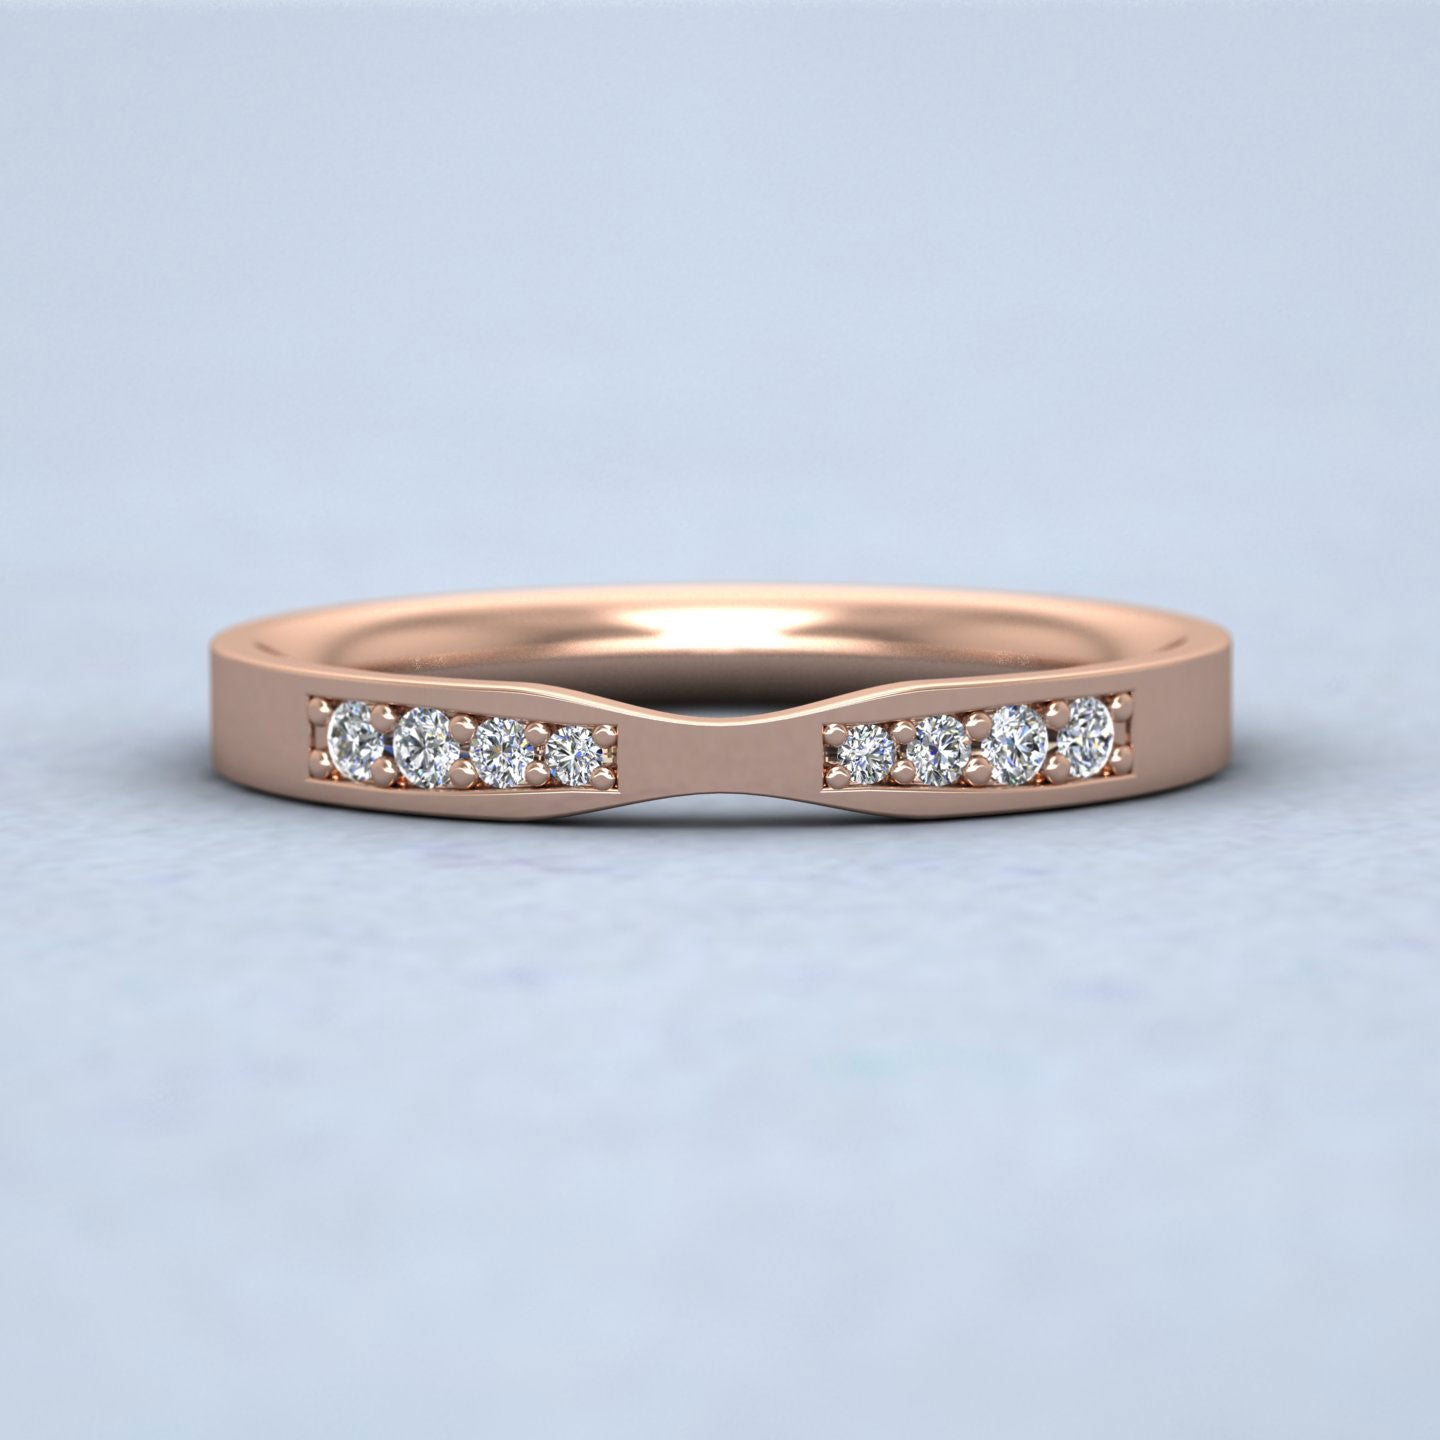 Pinch Shaped Wedding Ring In 9ct Rose Gold 2.5mm Wide